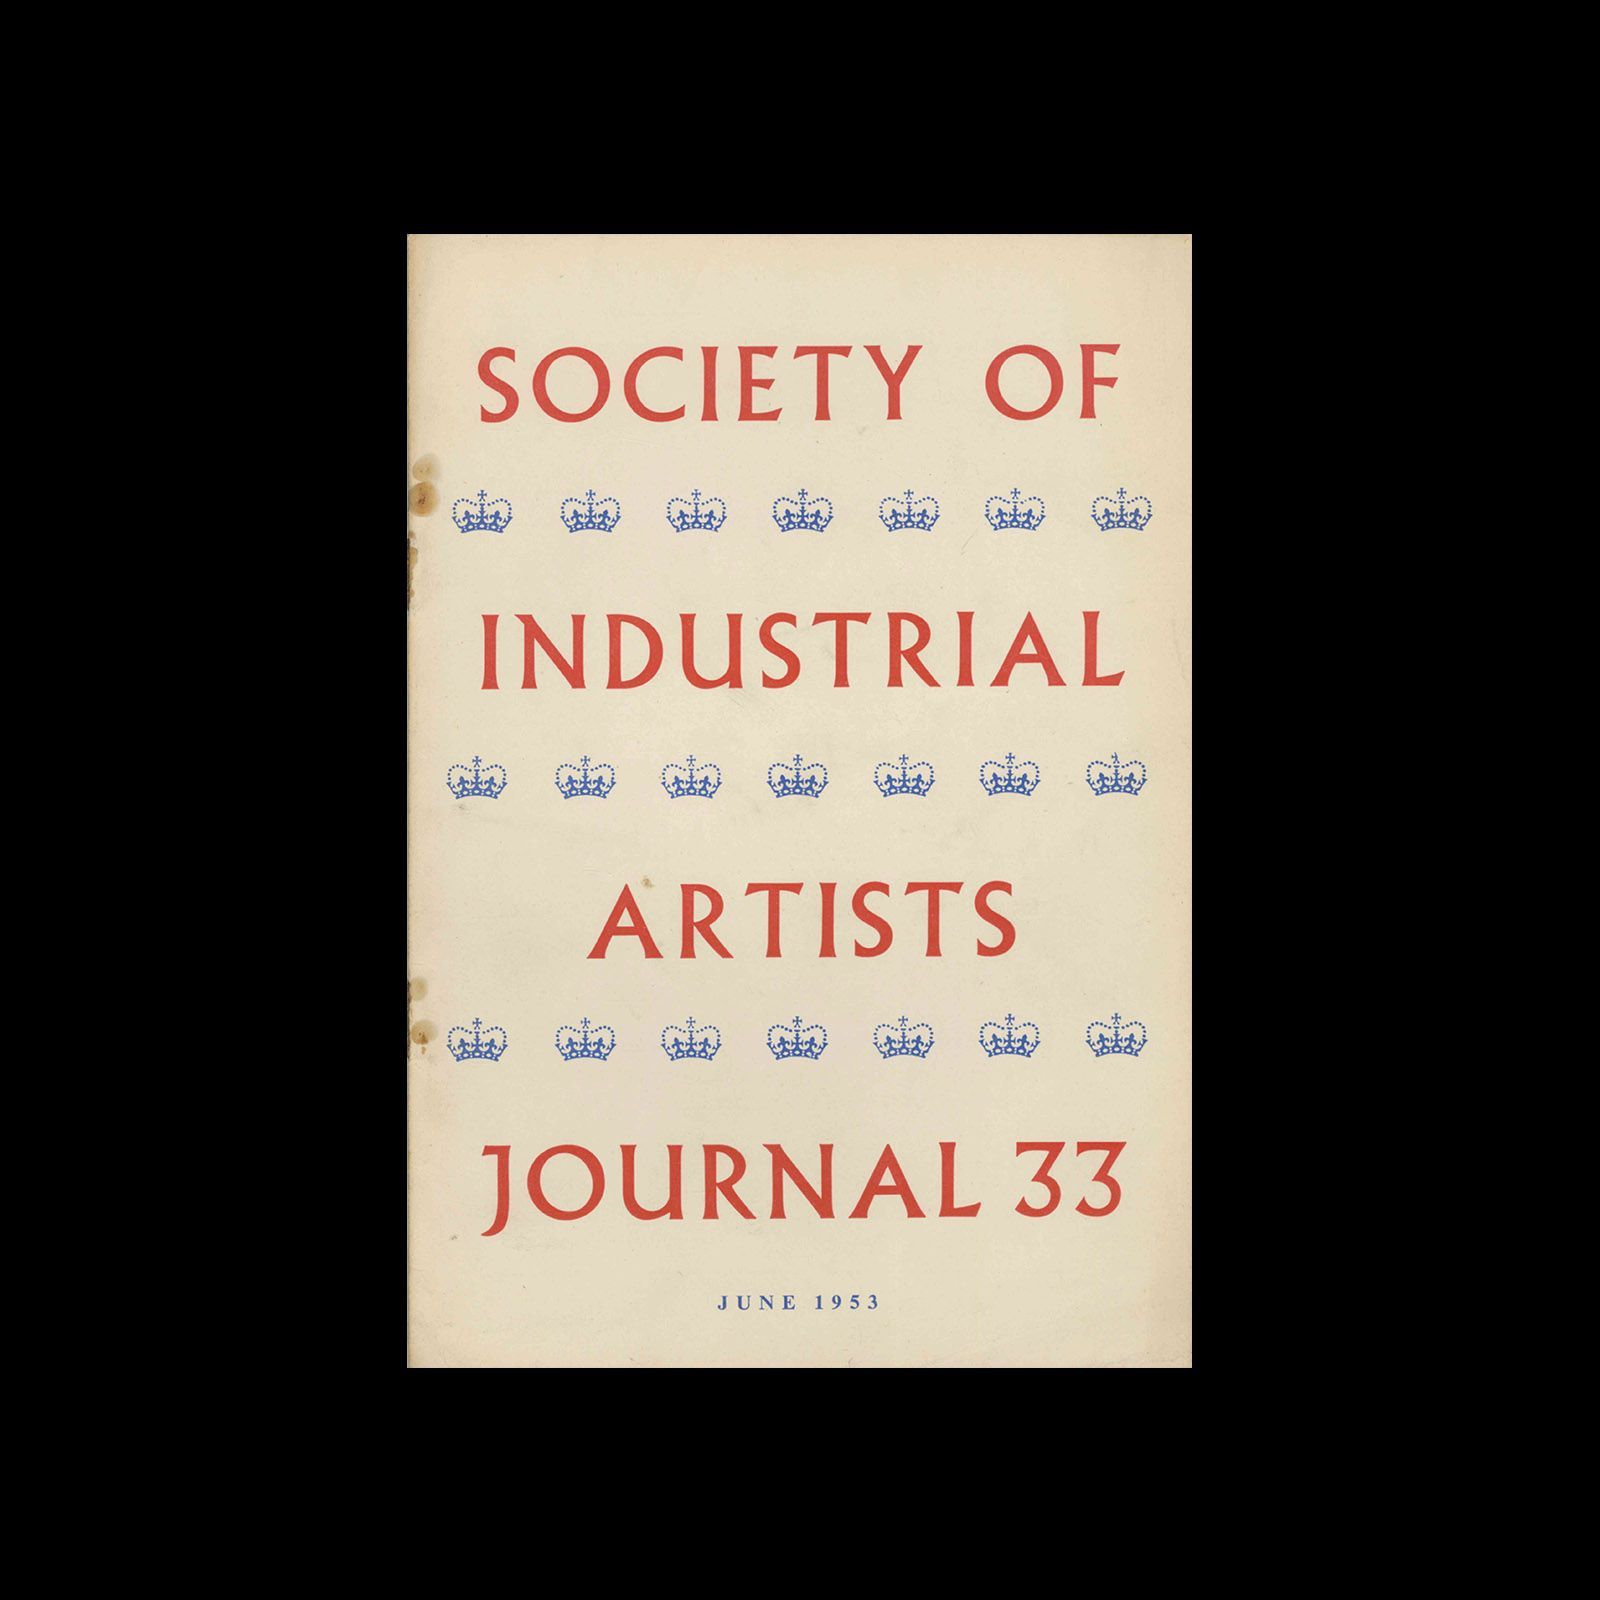 Society of Industrial Artists, 33, June 1953